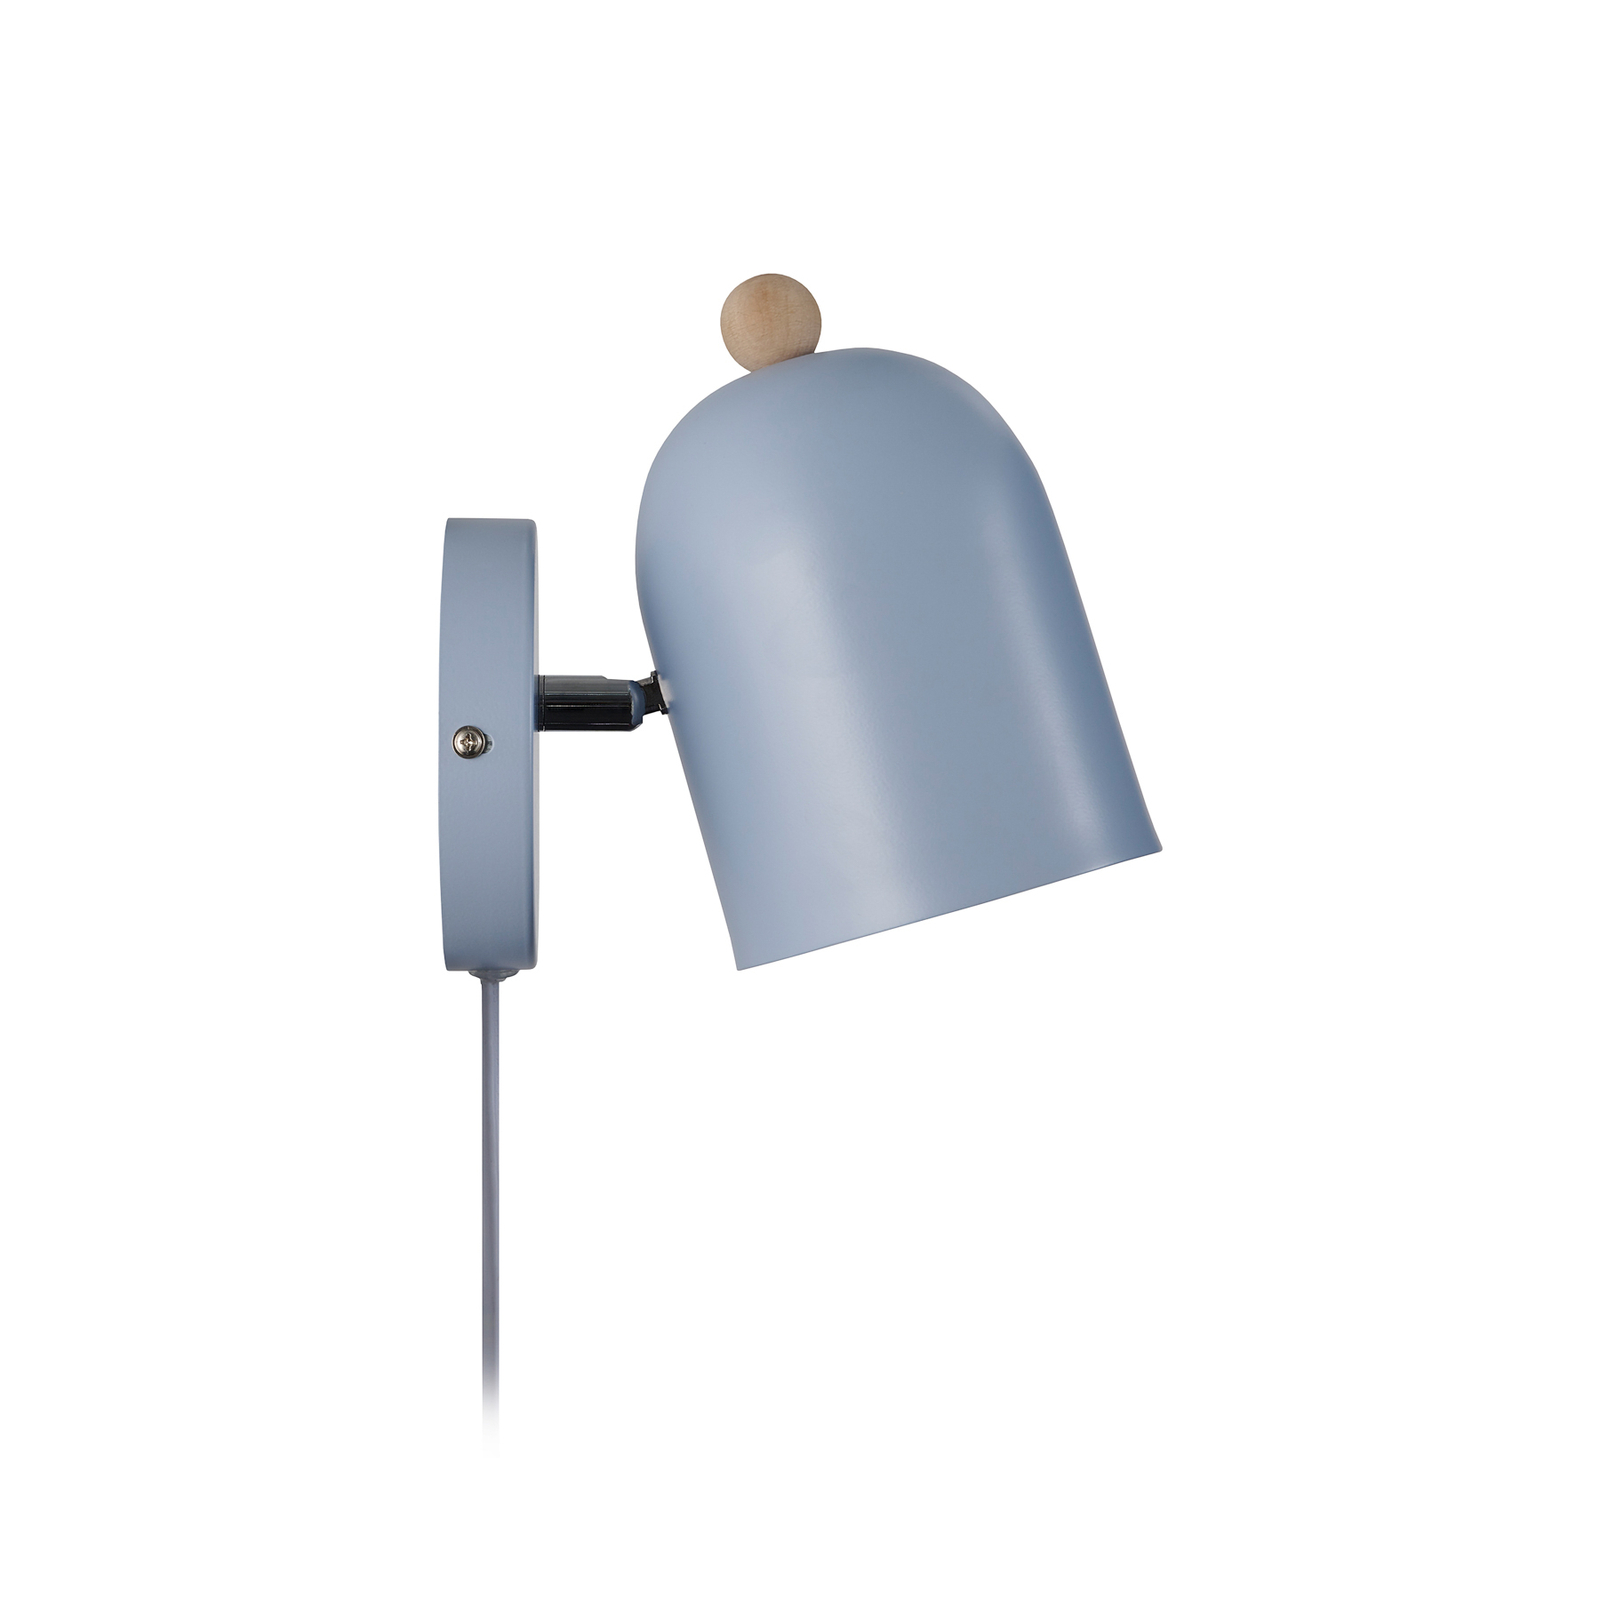 Gaston wall light with cable and plug, metal, blue